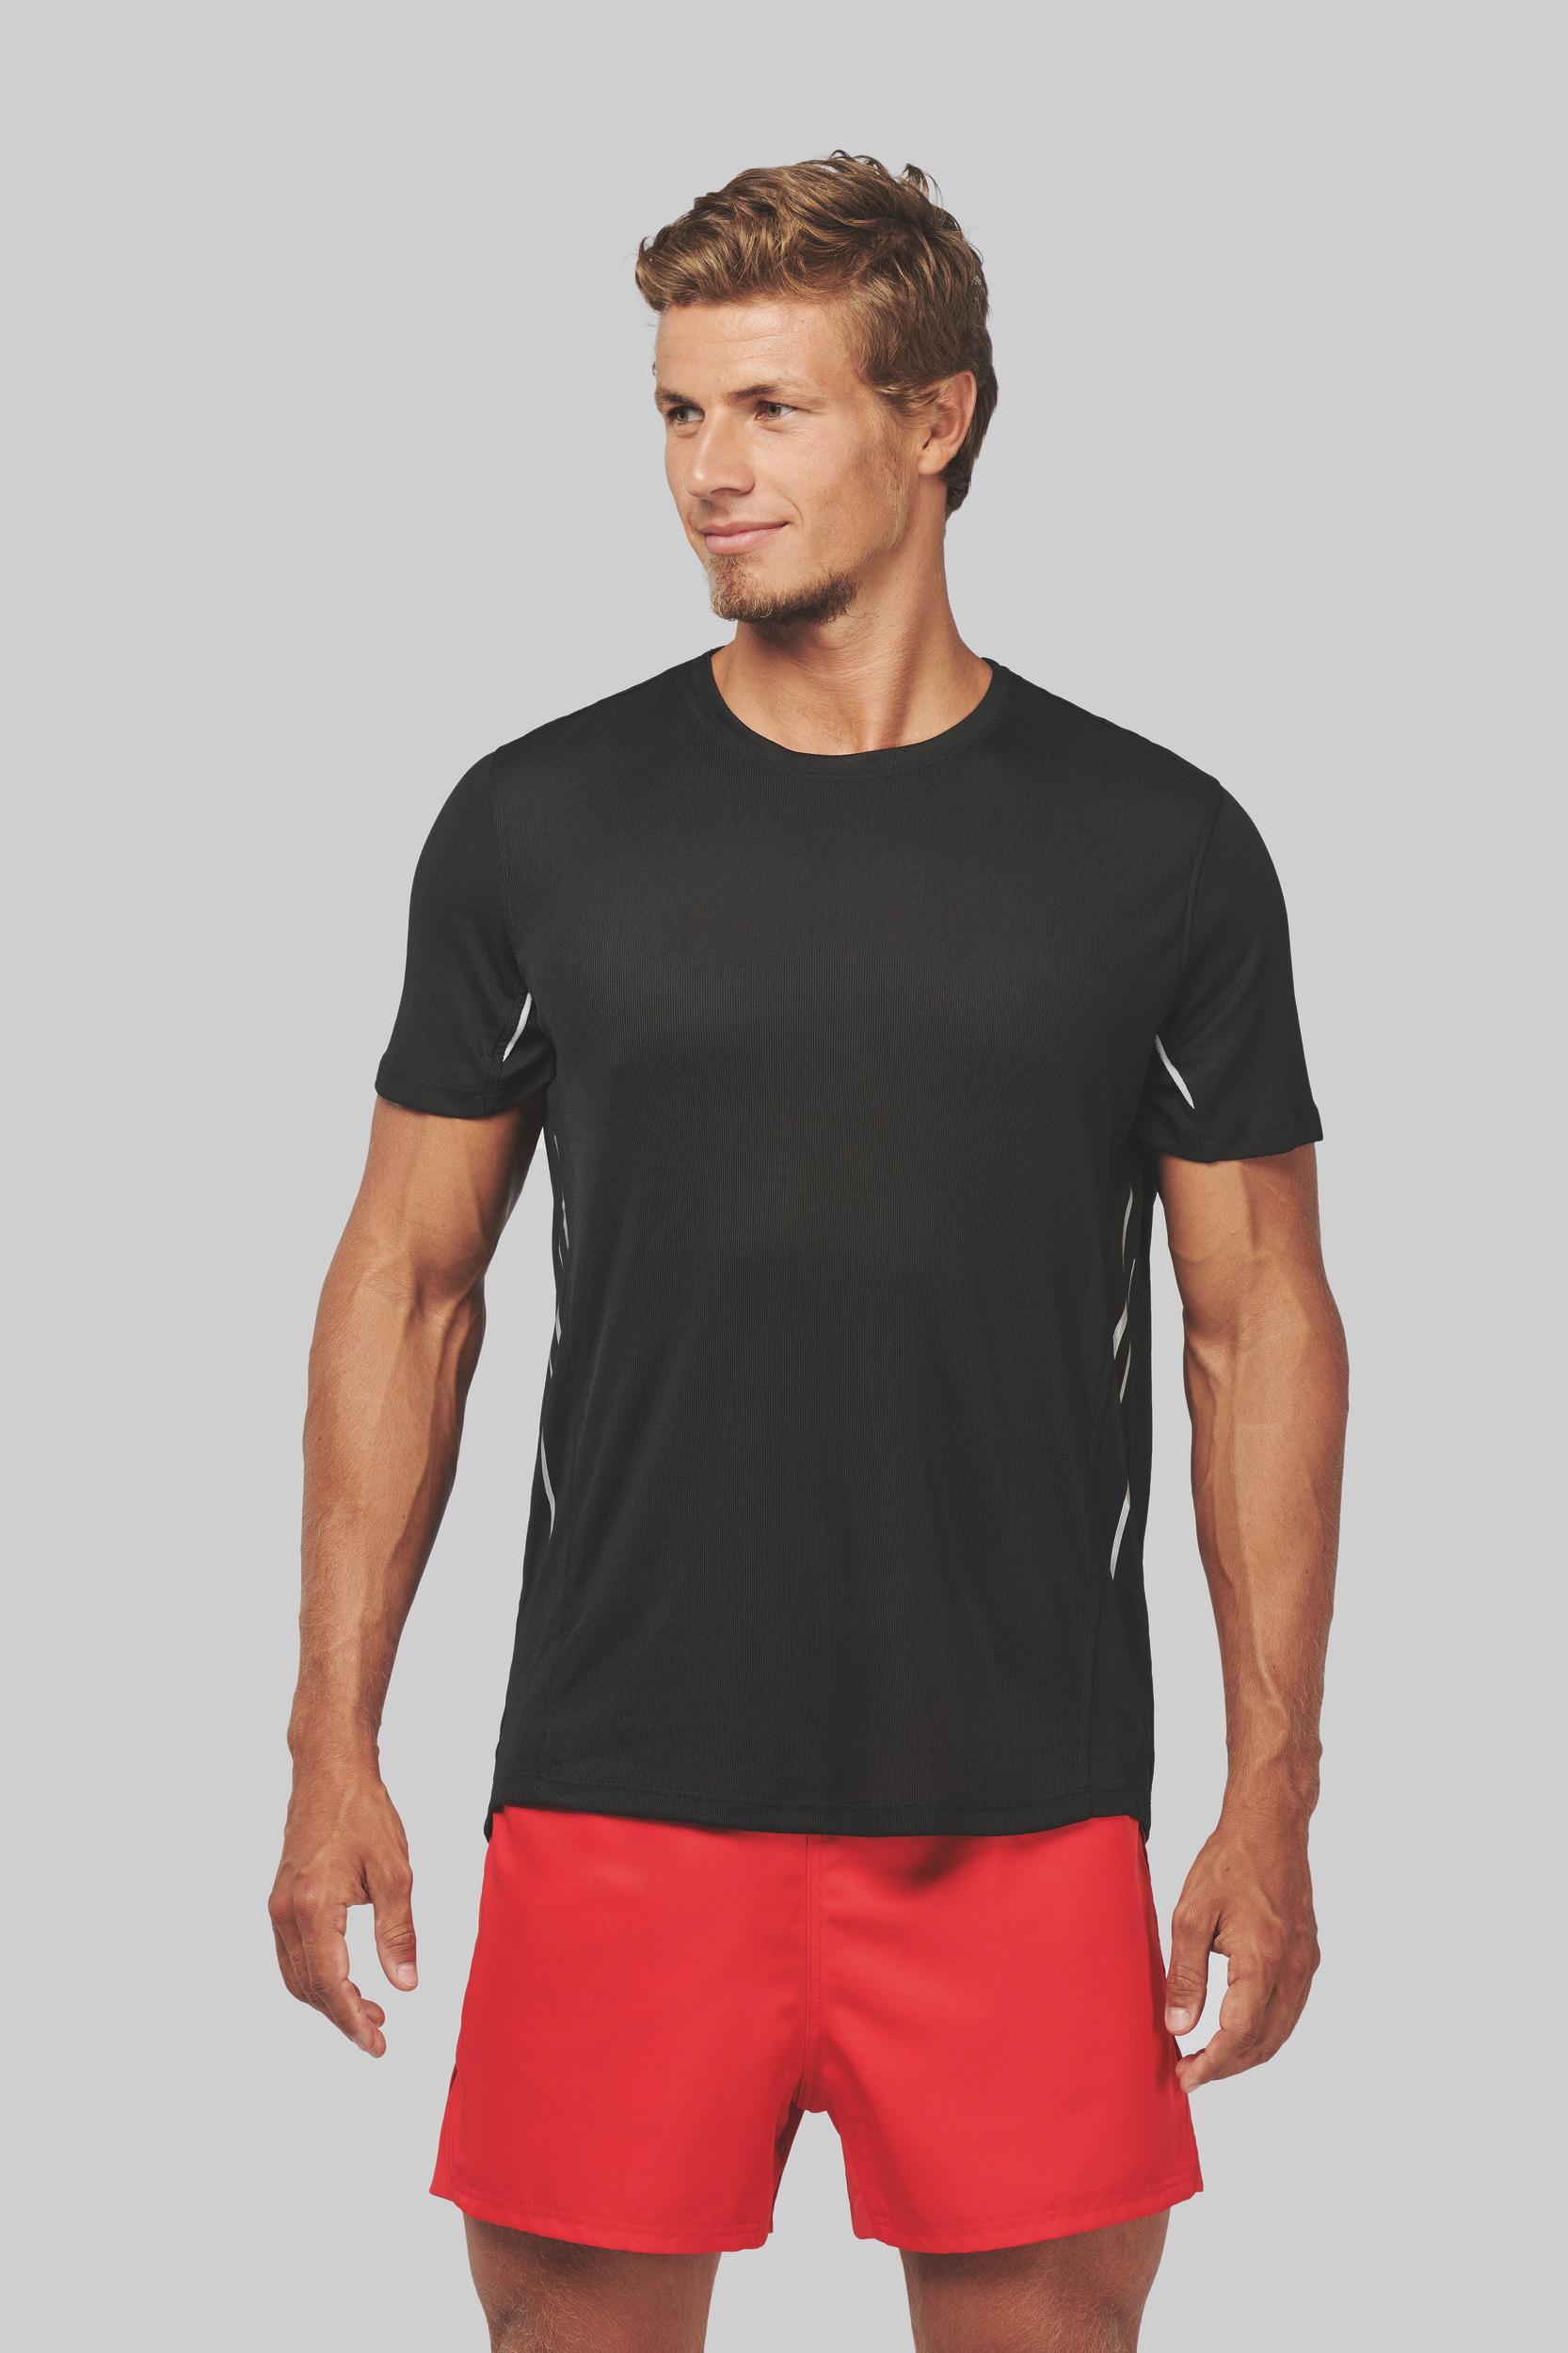 pictoMen's Sports T-Shirt | Light And Breathable | Embroidery & Flex 